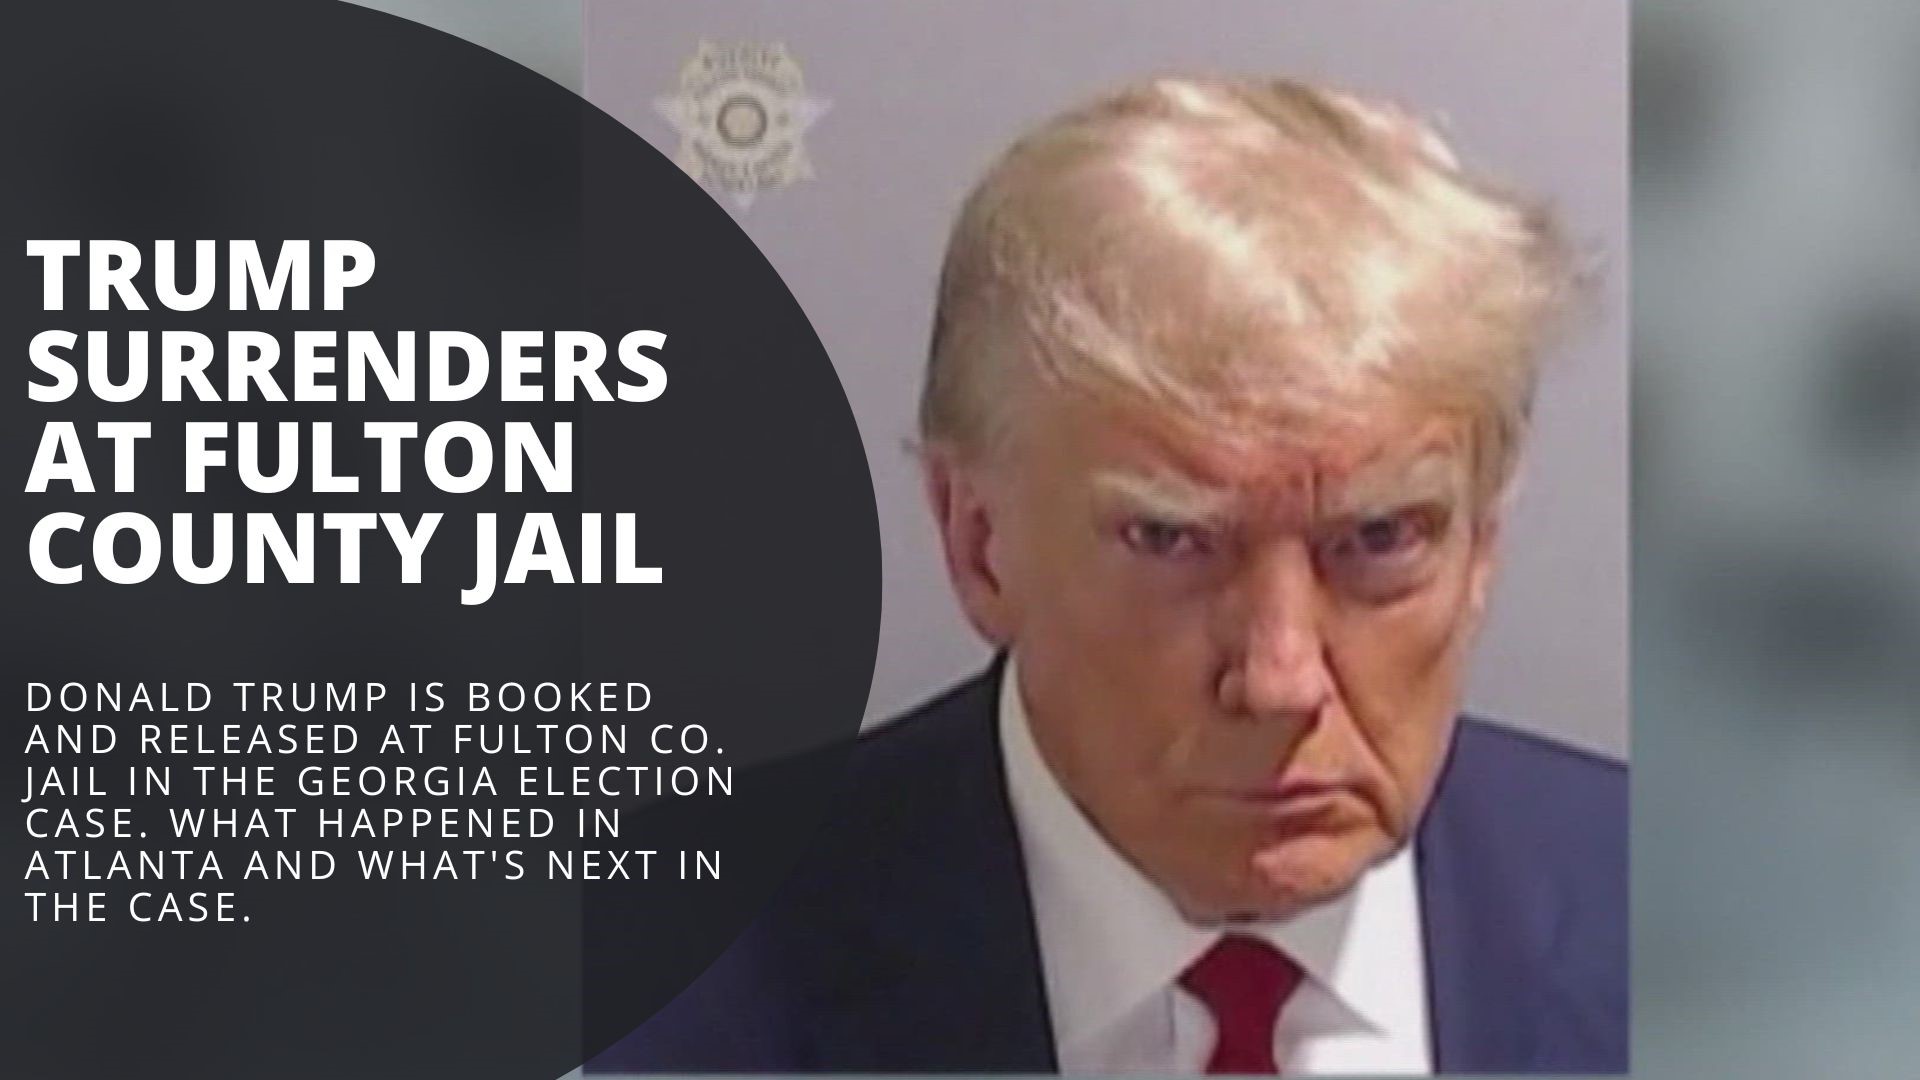 Donald Trump is booked and released at Fulton Co. jail in the Georgia election case. A look at what happened in Atlanta and what's next in the case.